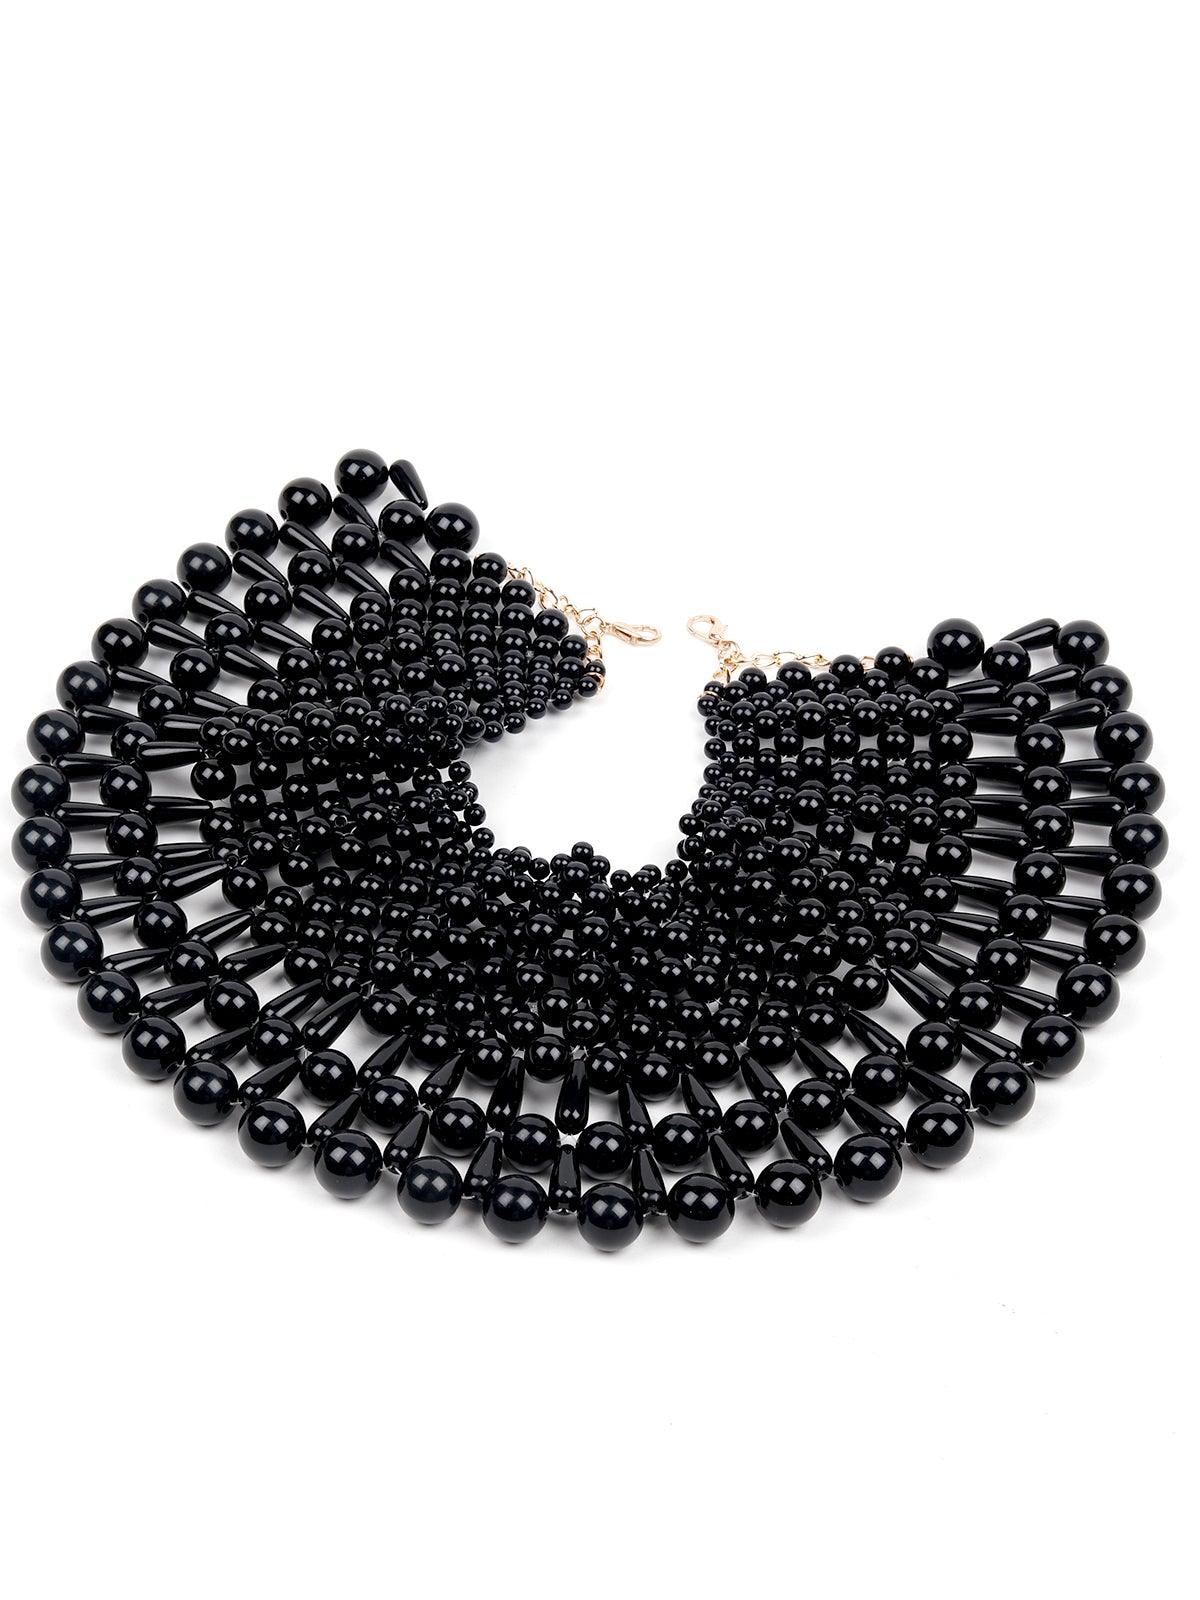 Buy Black Beaded Tube Collar Necklace - Accessorize India